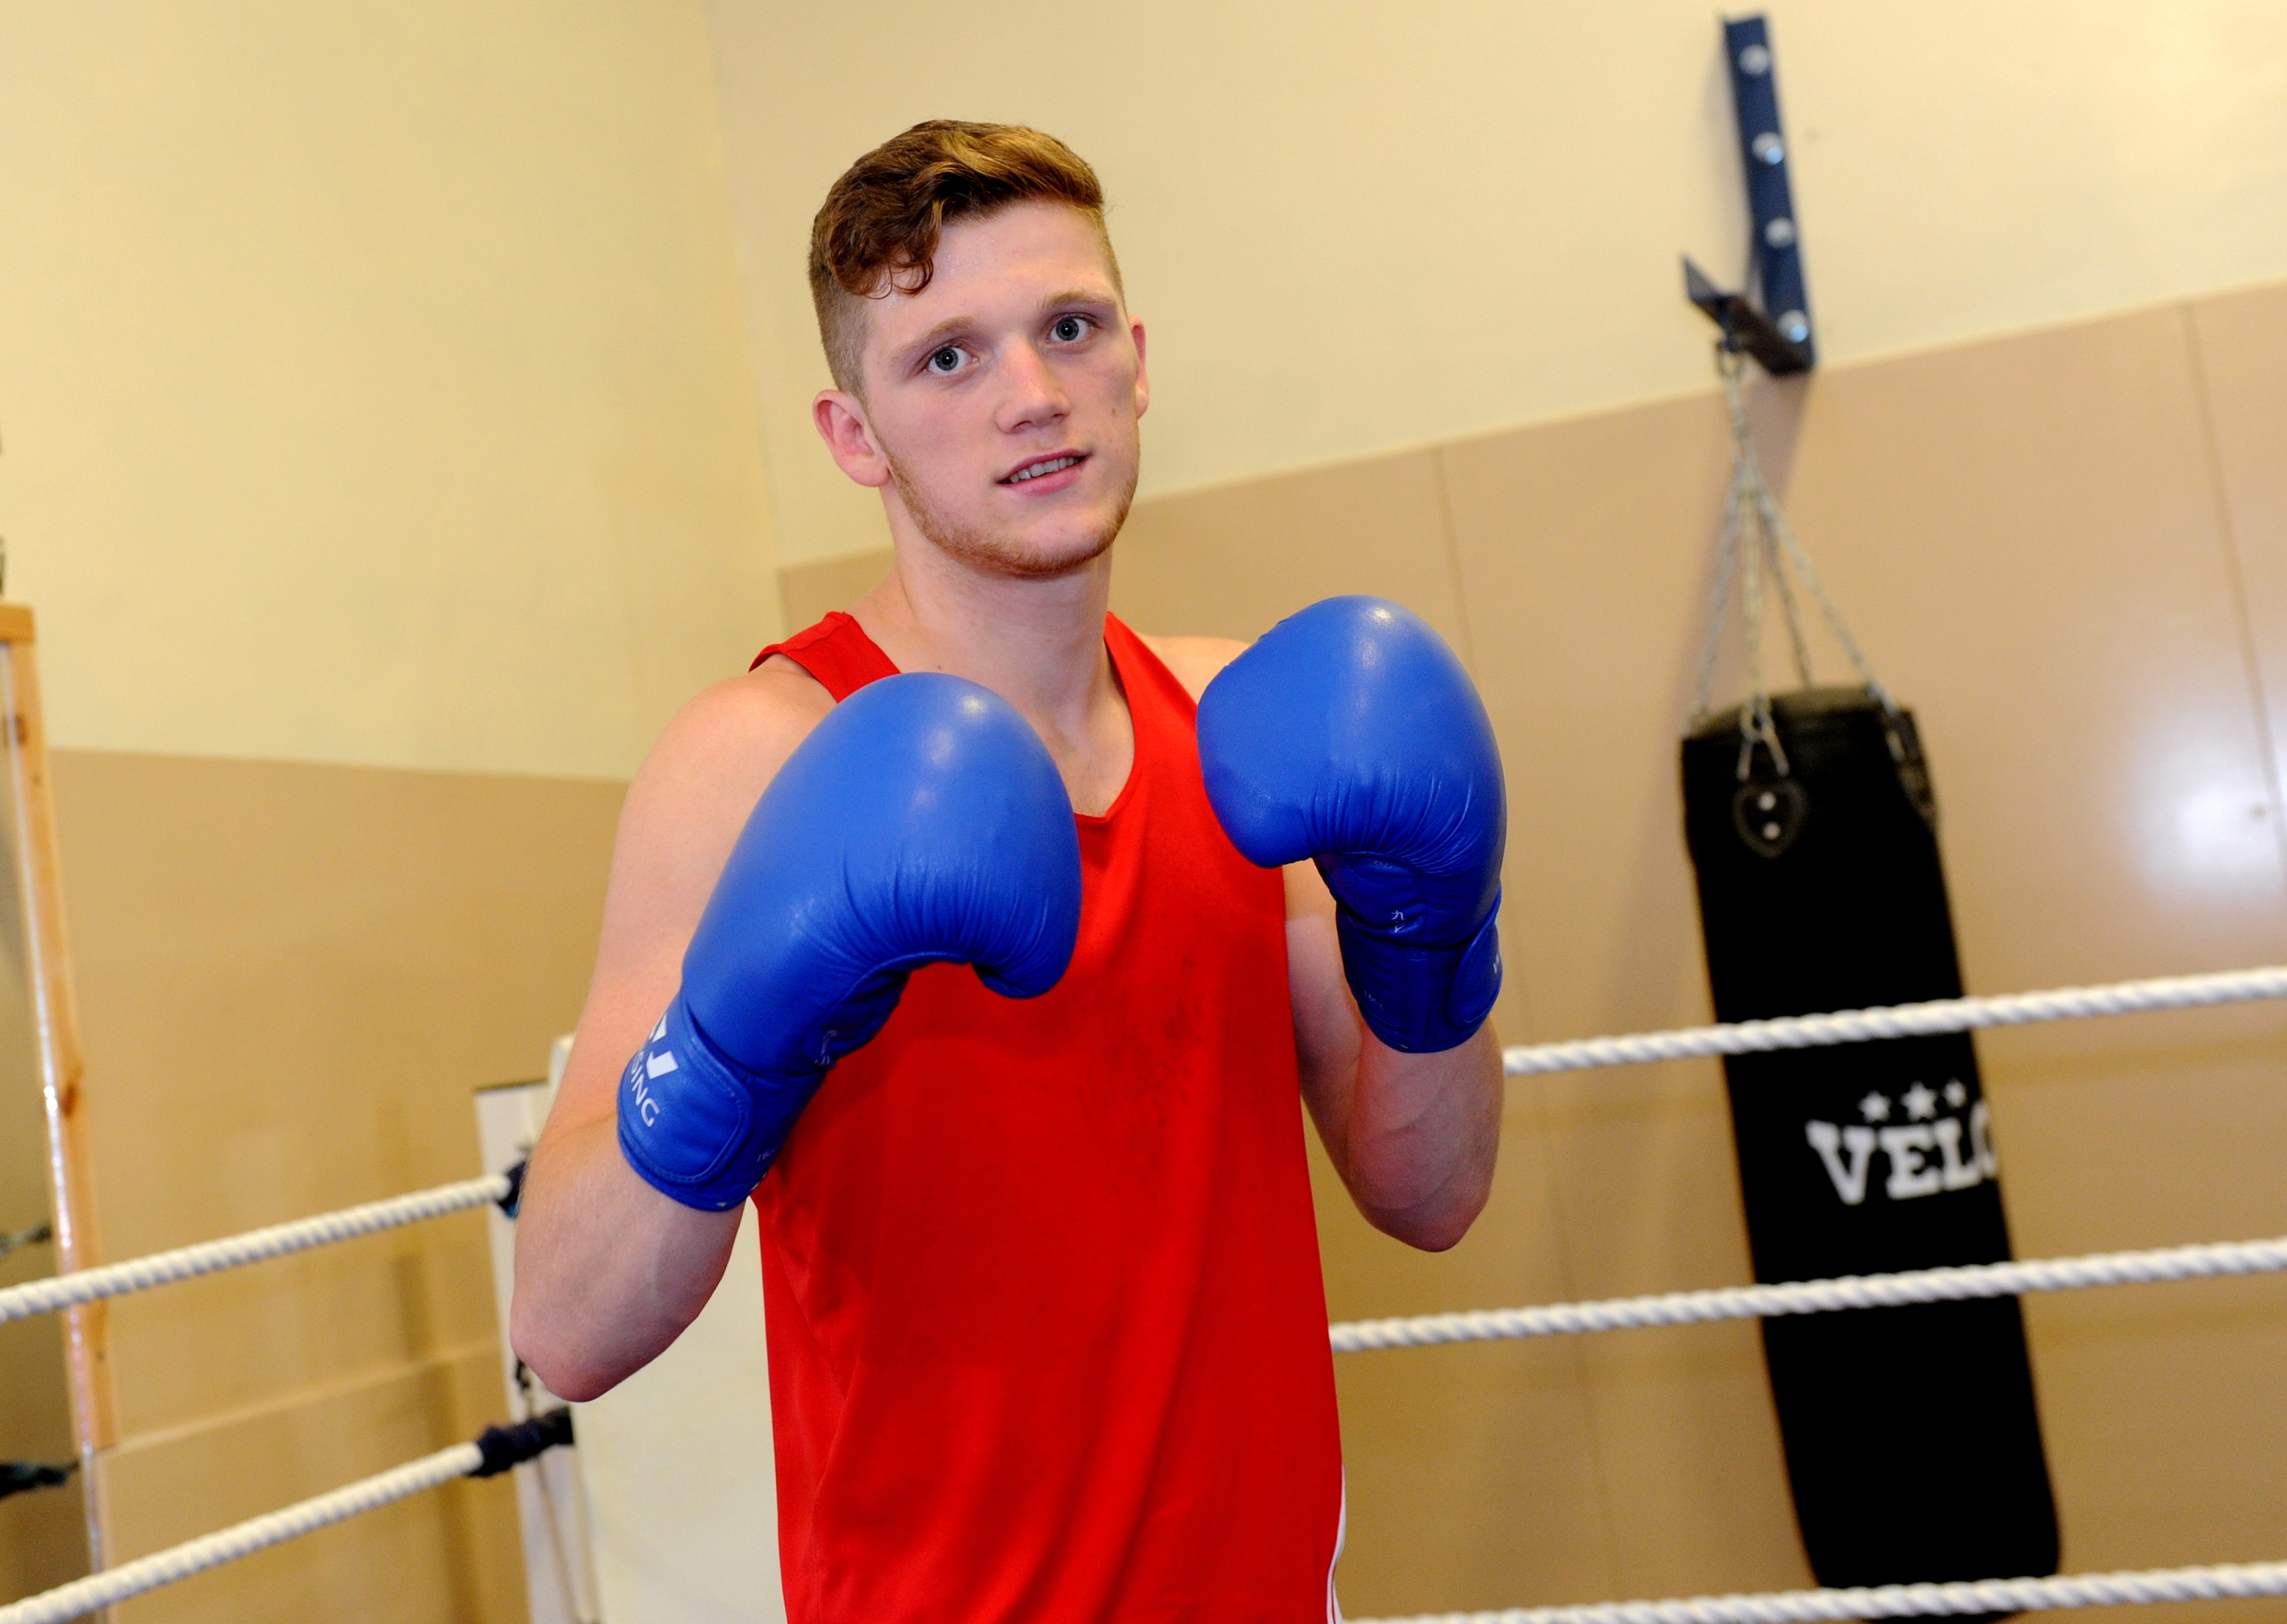 N-east boxer Docherty chosen for 2018 Commonwealth Games on Gold Coast ...